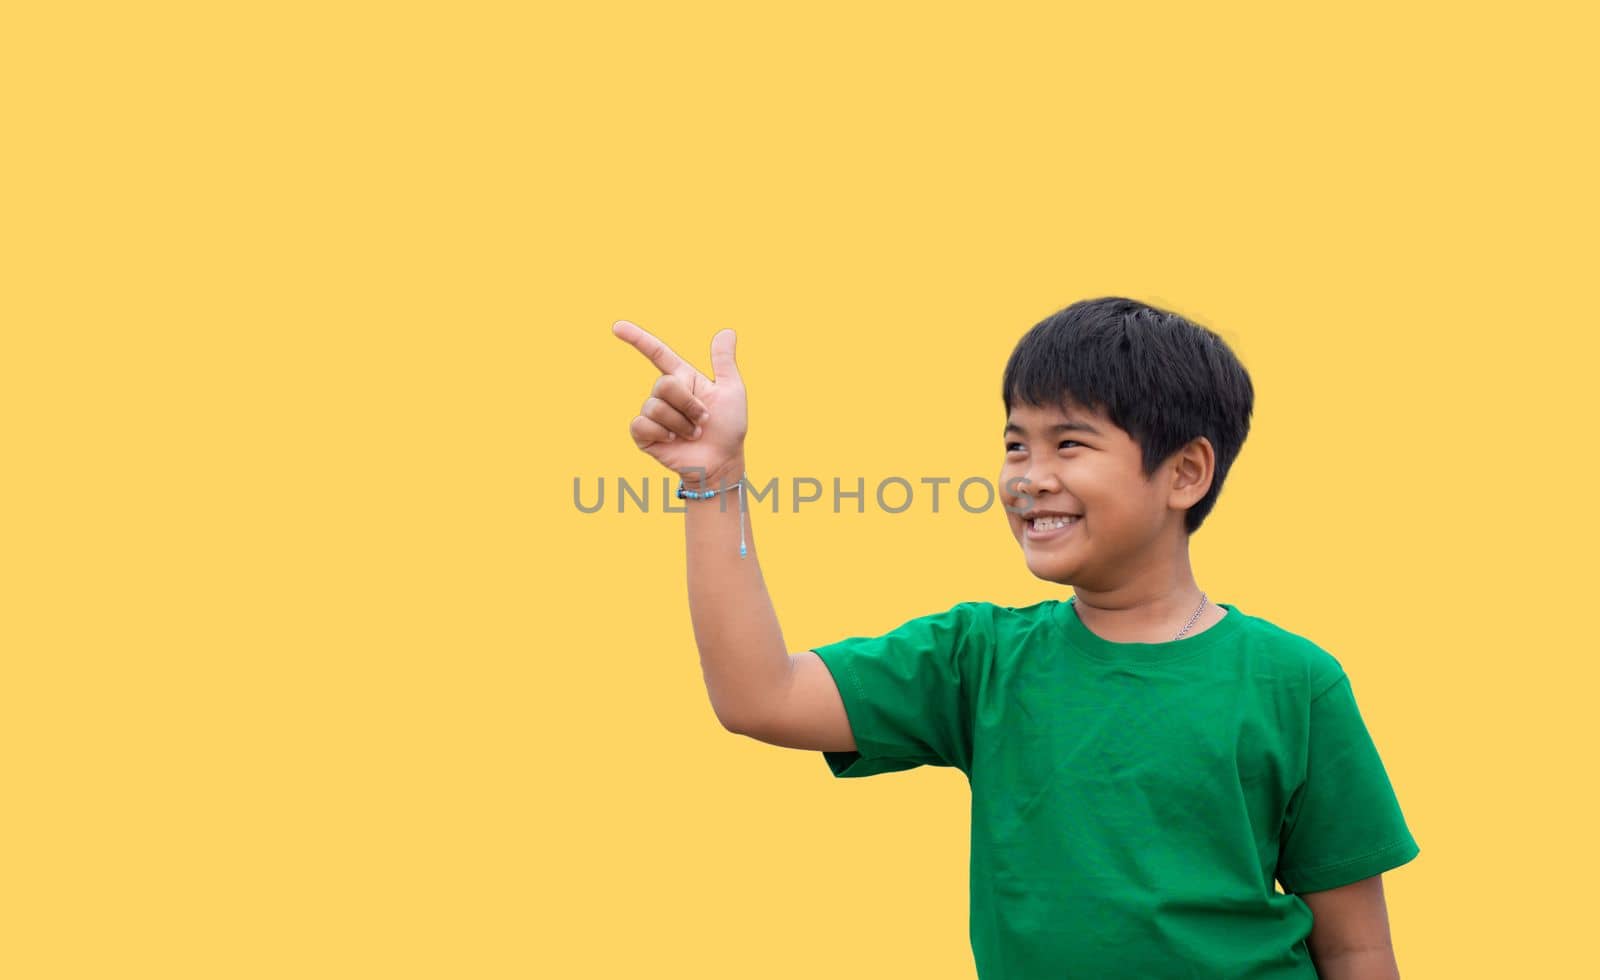 The boy smiled and pointed his hand to his side. on a yellow background